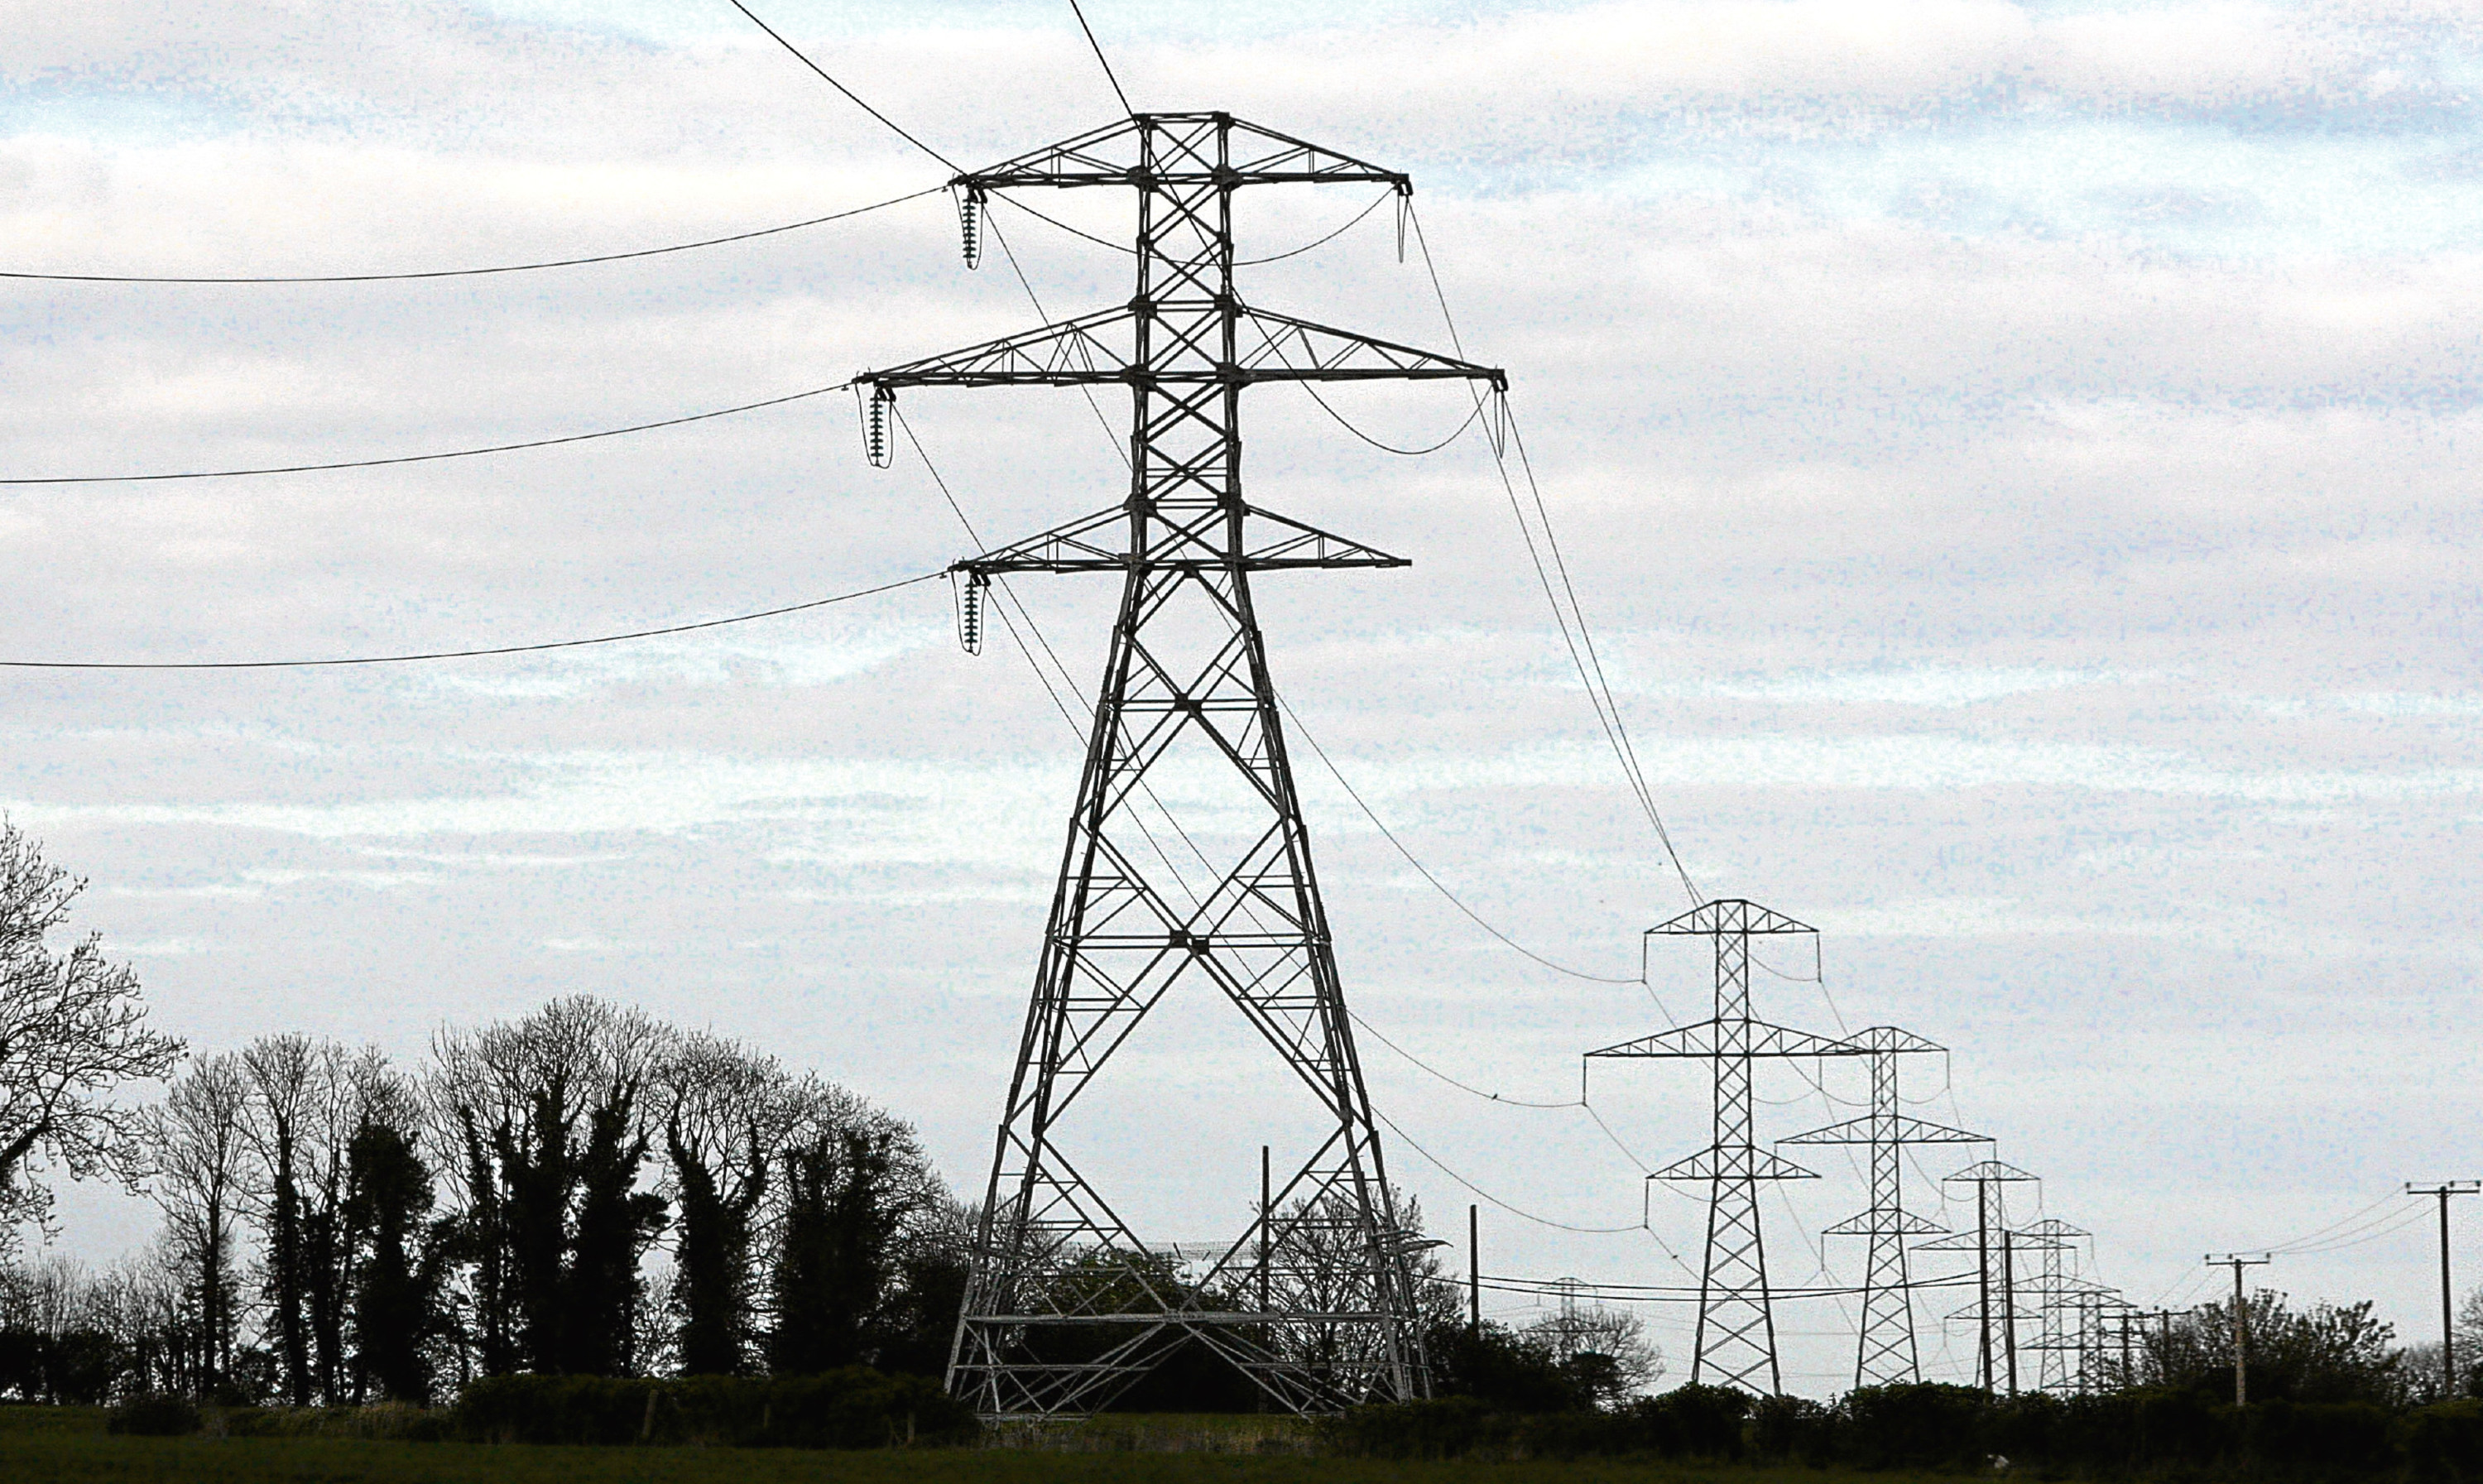 Electricity pylons carrying supplies from generators to consumers.